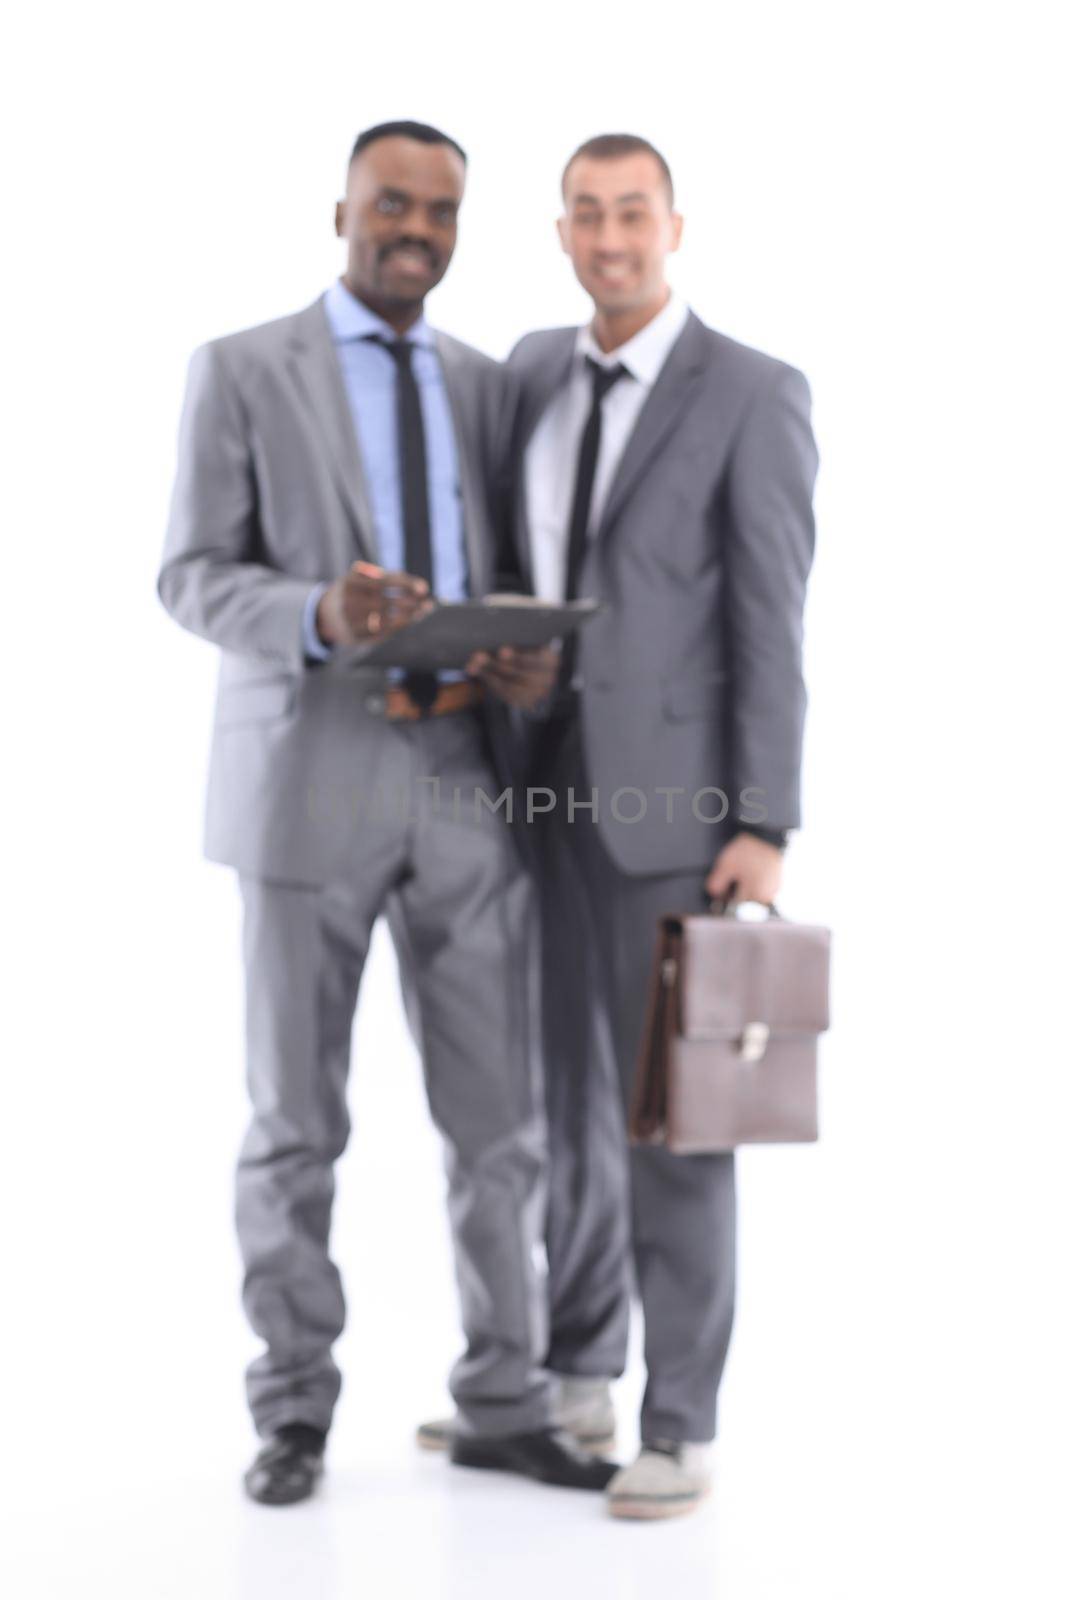 Blurred image of two young employees working together on a white background.